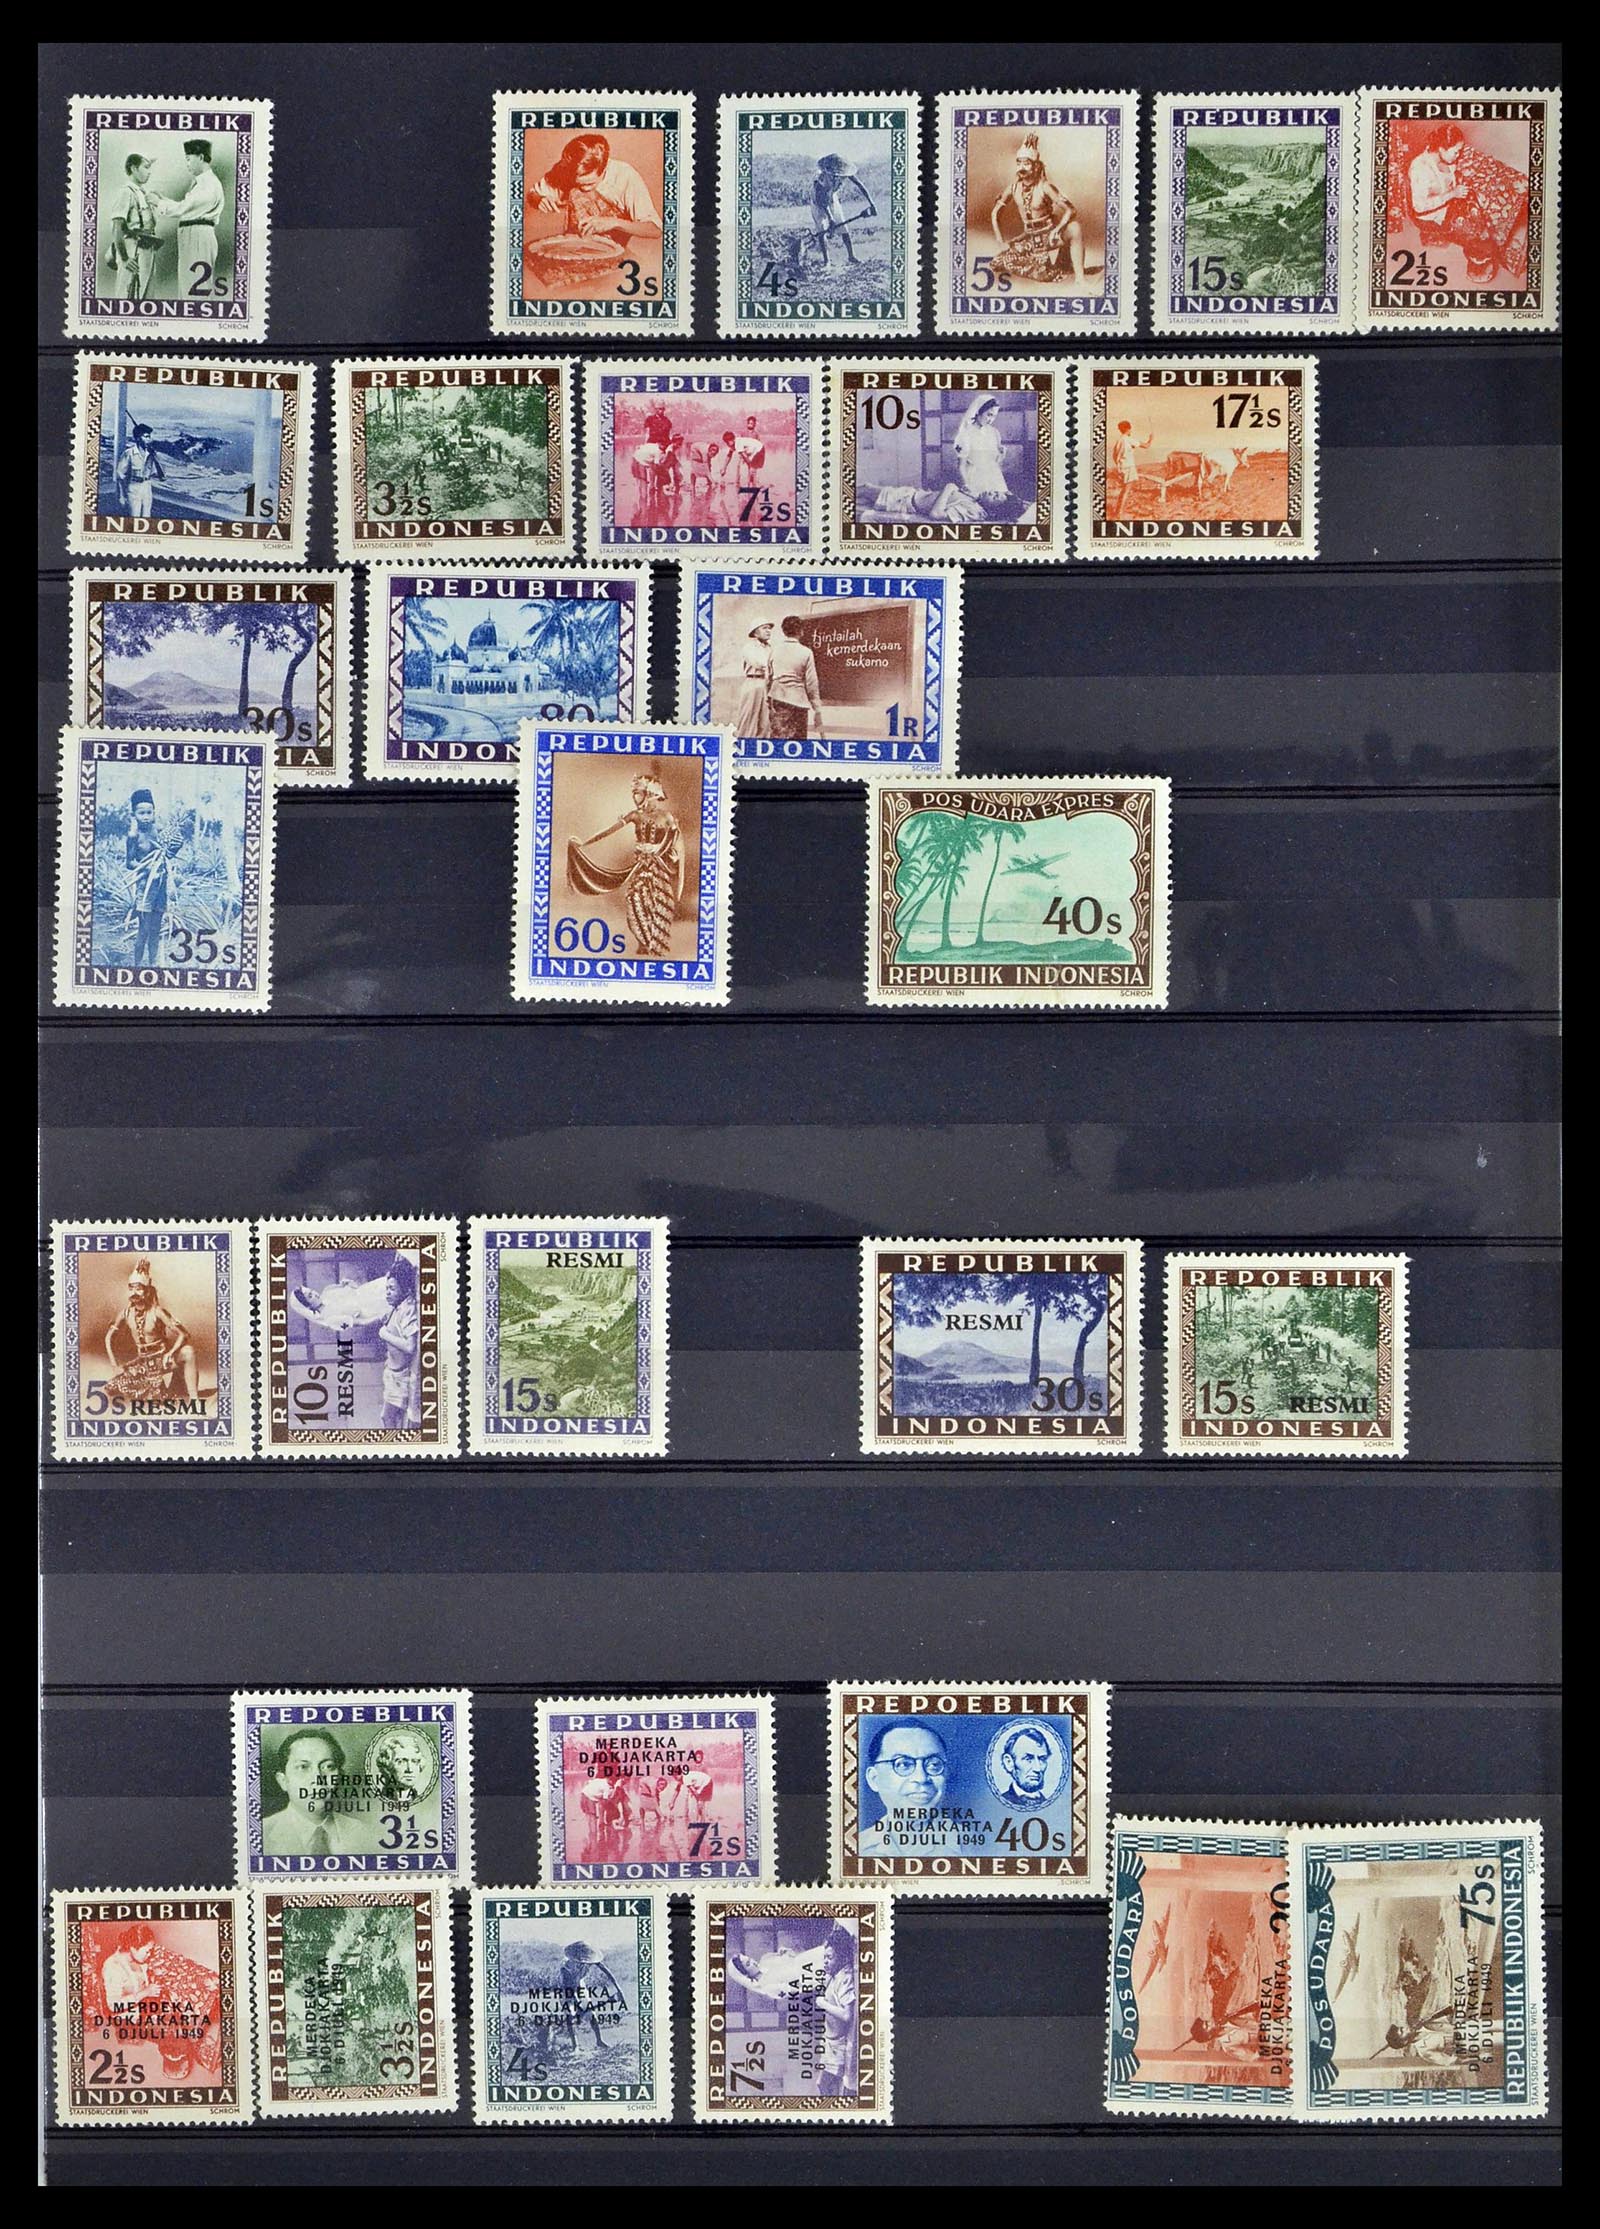 39026 0081 - Stamp collection 39026 Dutch east Indies and Suriname 1864-1975.